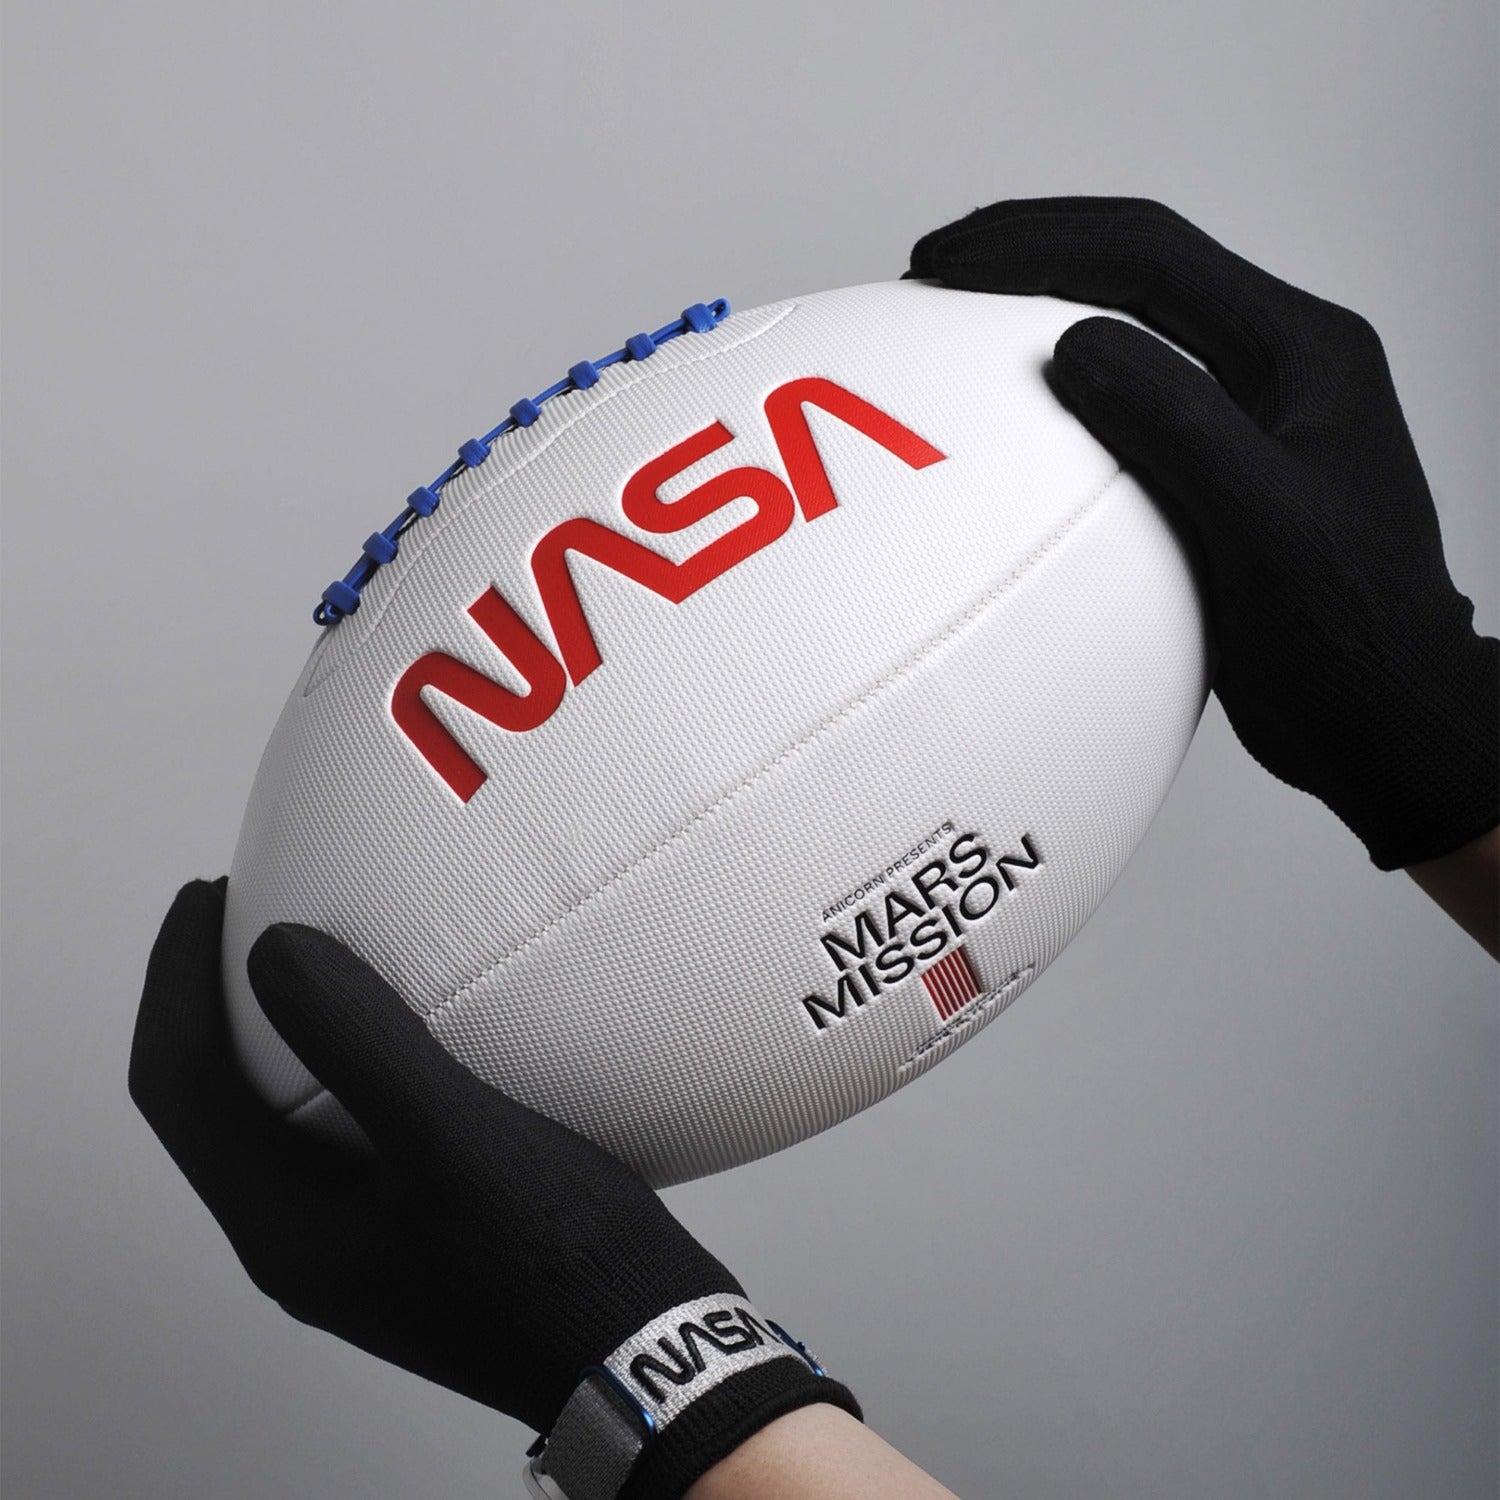 Stamped with NASA worm logo, Jezero Crater coordinates and made with exclusive microfiber composite leather, The Mars Field football is the one and only NASA edition of its kind.